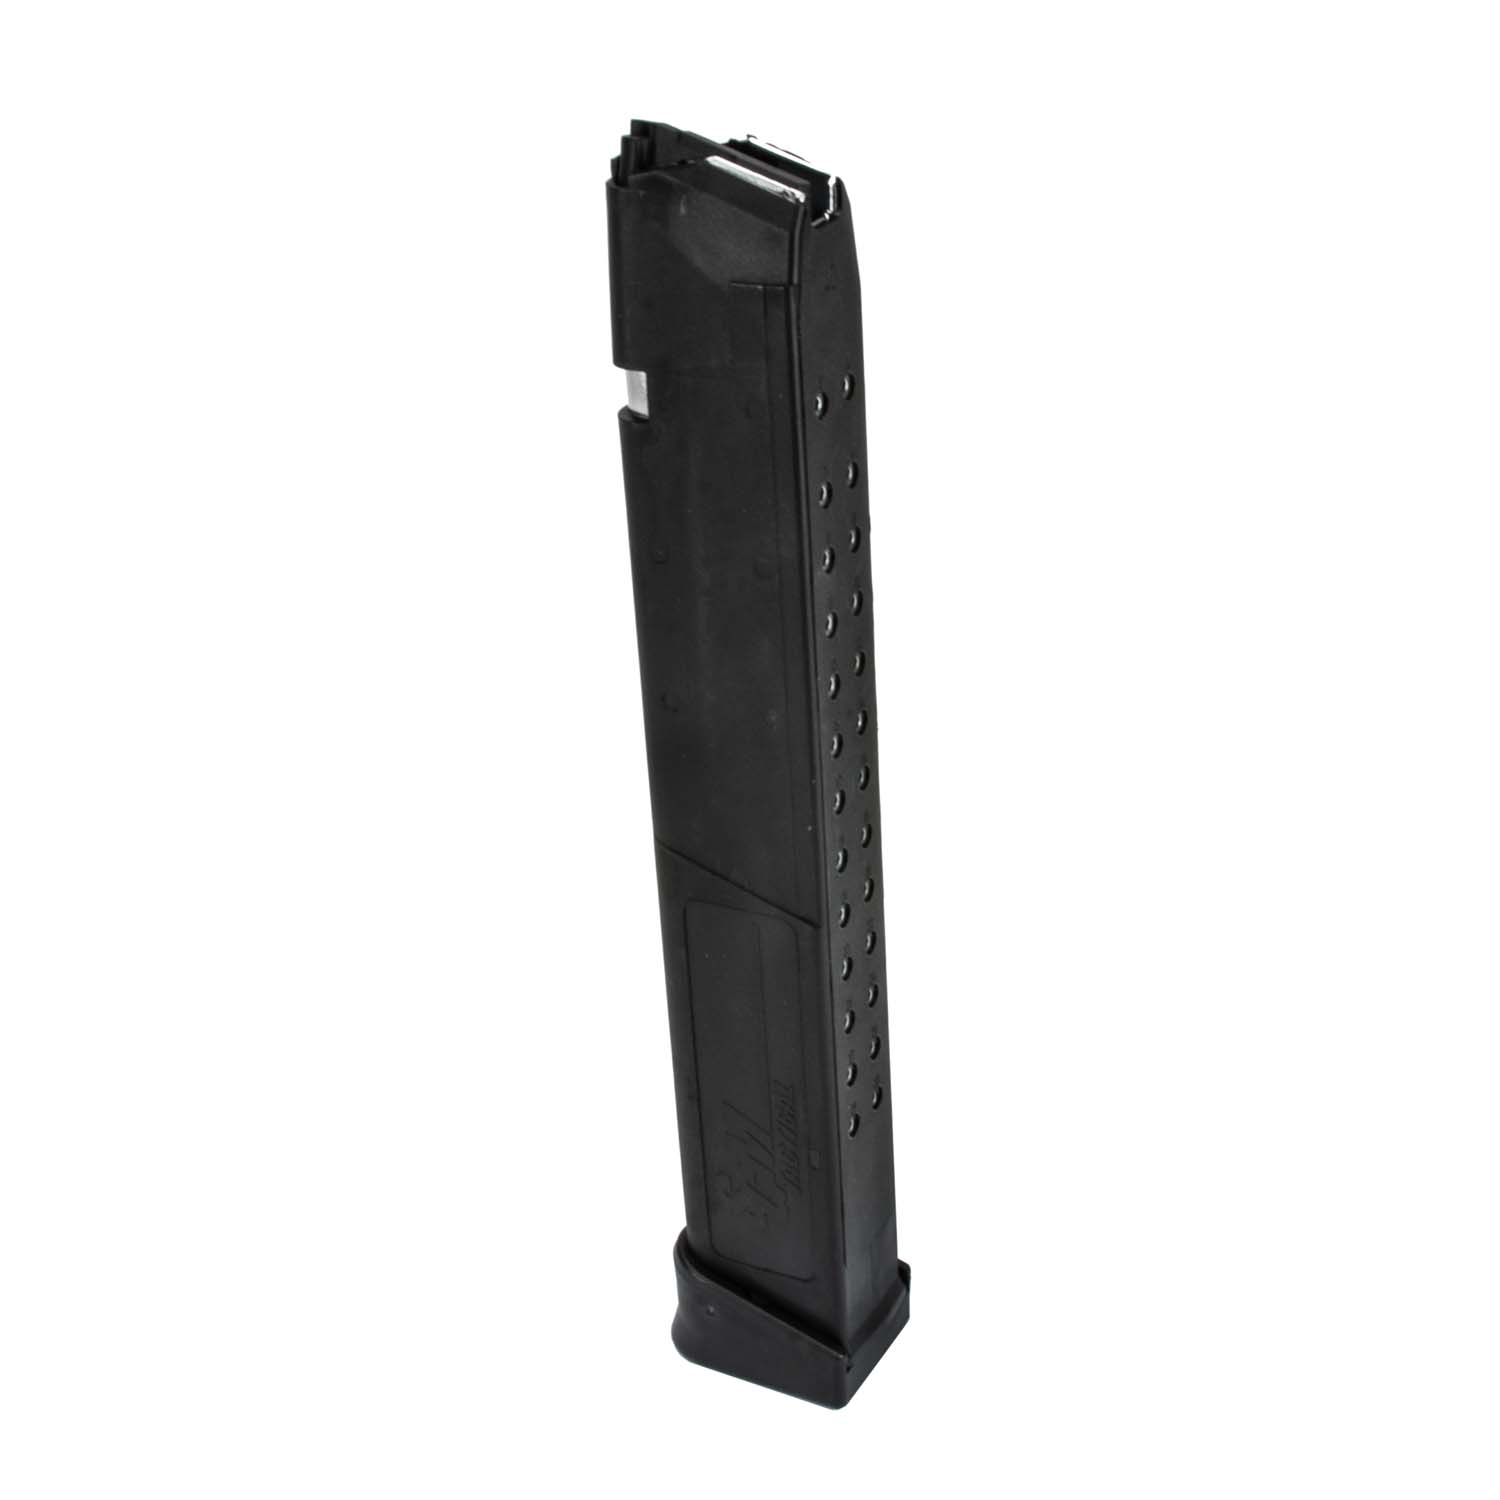 2 SGM Tactical Pistol Mag Speed Loader For Glock 9mm and 40 s&w 